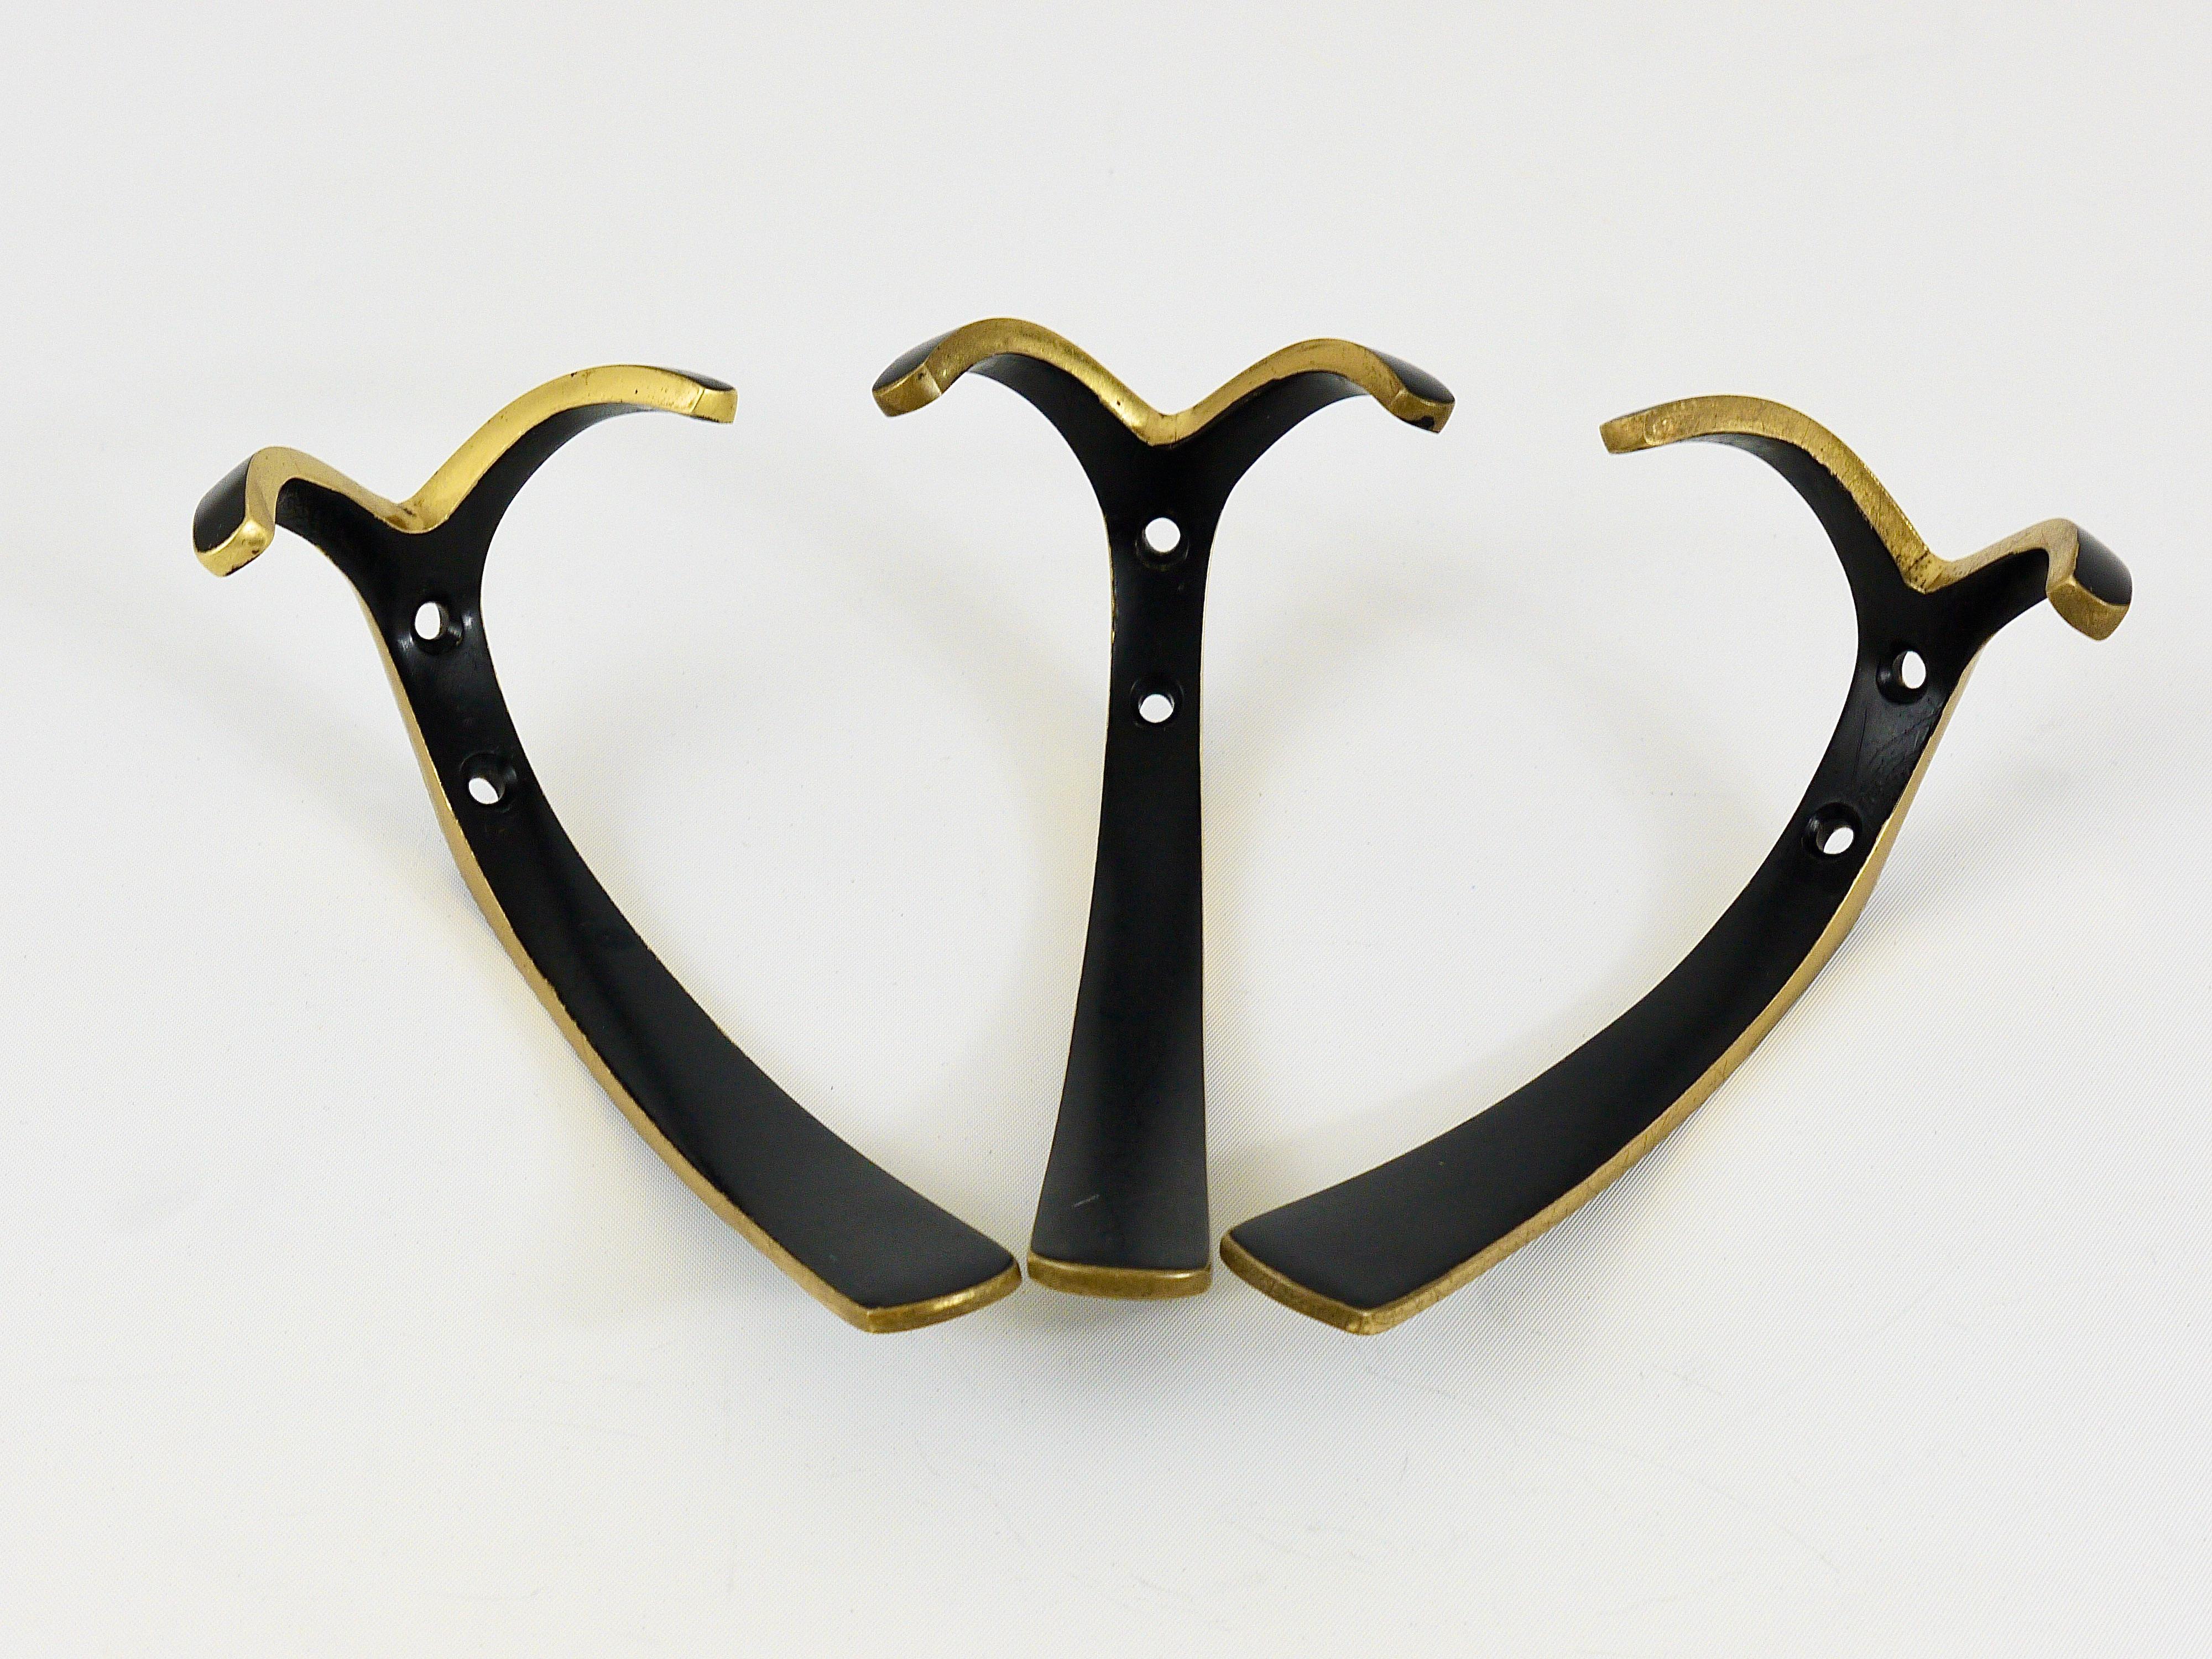 Up to 10 Midcentury Brass Double Wall Hooks by Herta Baller, Austria, 1950s For Sale 5